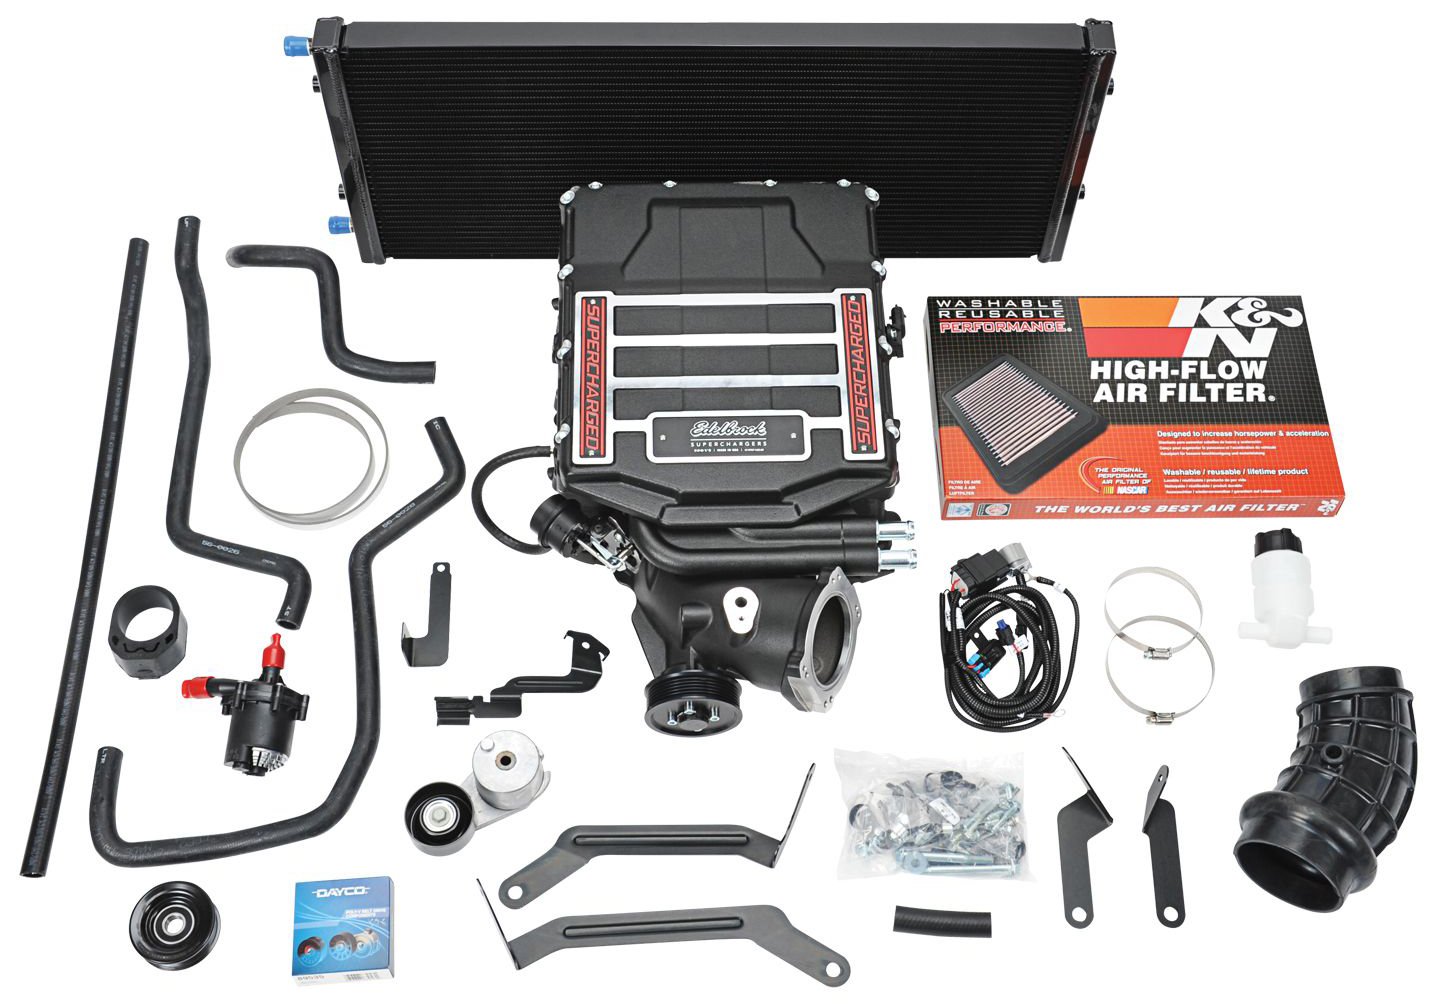 Stage-1 E-Force Supercharger Kit fits Select Late-Model GM Silverado/Sierra 1500 5.3L Pickup Truck, without Tuner